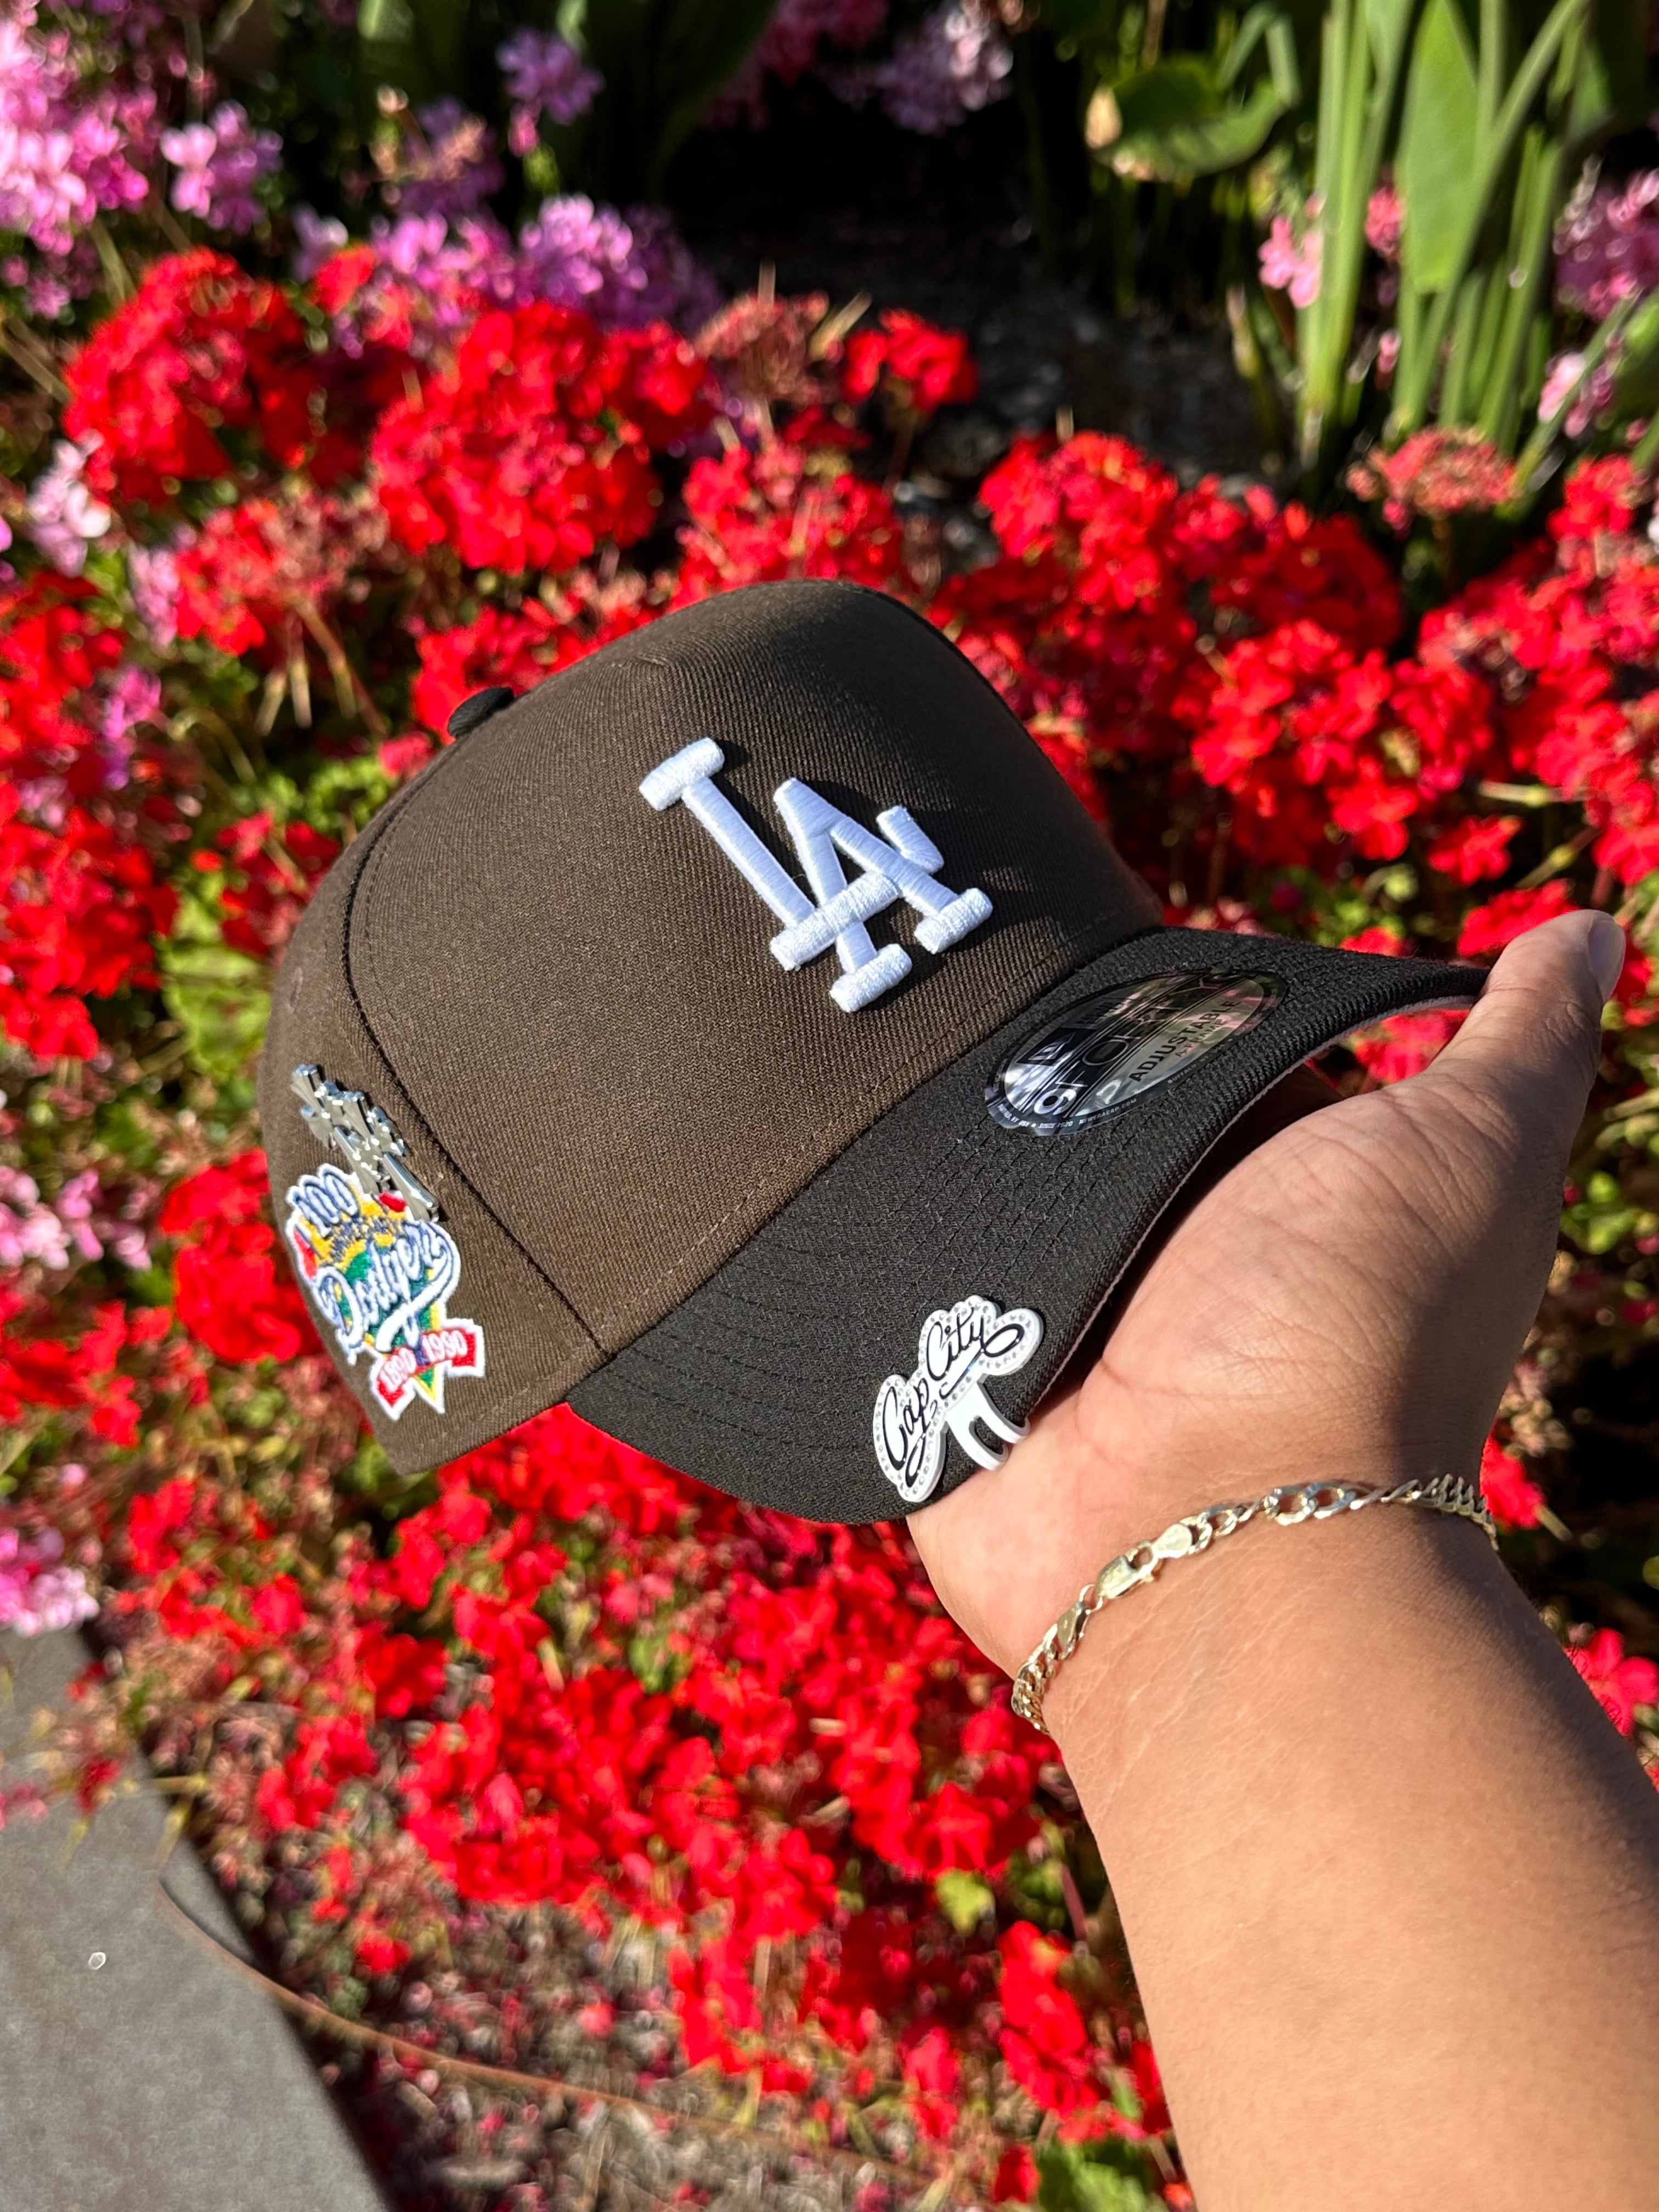 NEW ERA EXCLUSIVE 9FORTY A-FRAME MOCHA/BLACK LOS ANGELES DODGERS W/ 100TH WORLD SERIES SIDE PATCH